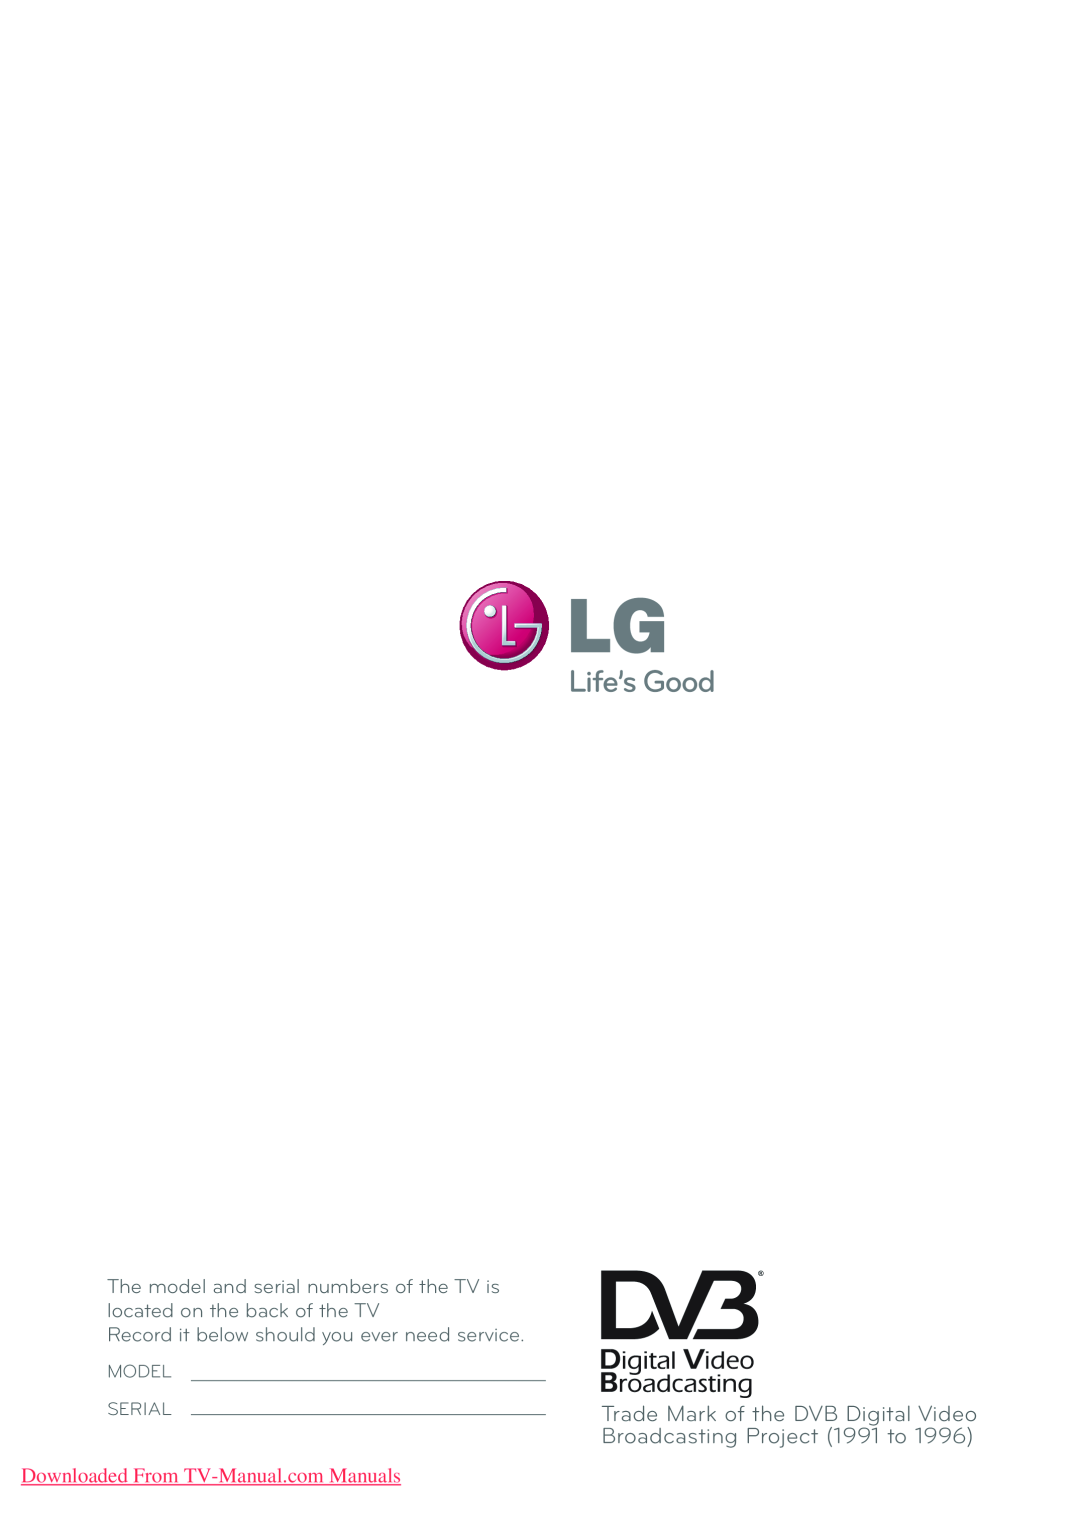 LG Electronics 42/50PT35**, 50/60PZ55** Trade Mark of the DVB Digital Video Broadcasting Project 1991 to, Model Serial 